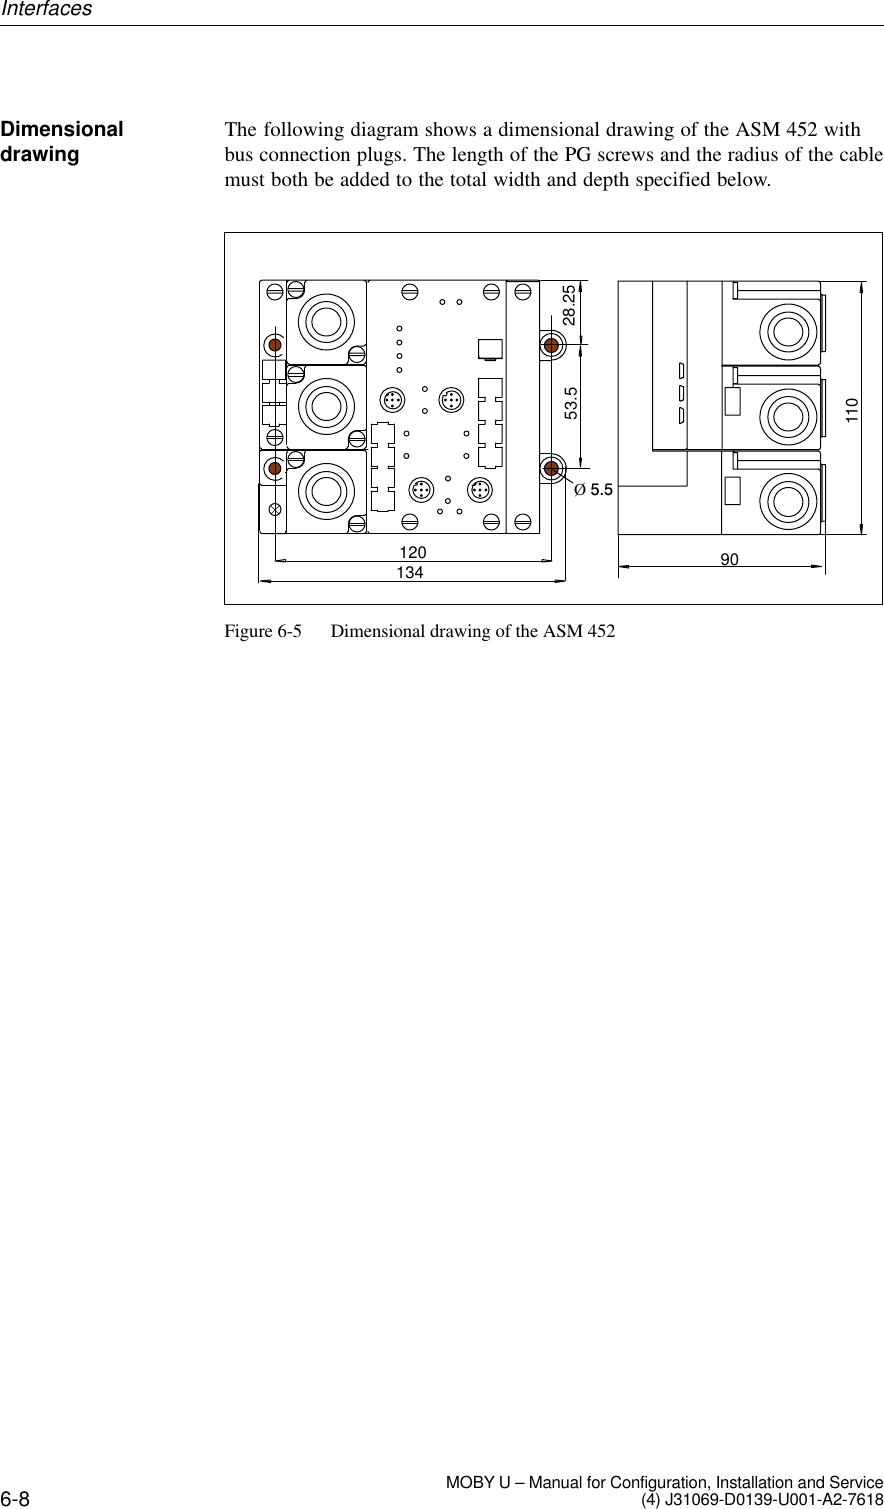 6-8 MOBY U – Manual for Configuration, Installation and Service(4) J31069-D0139-U001-A2-7618The following diagram shows a dimensional drawing of the ASM 452 withbus connection plugs. The length of the PG screws and the radius of the cablemust both be added to the total width and depth specified below.1109053.5 28.25134120Ø 5.5Figure 6-5 Dimensional drawing of the ASM 452DimensionaldrawingInterfaces